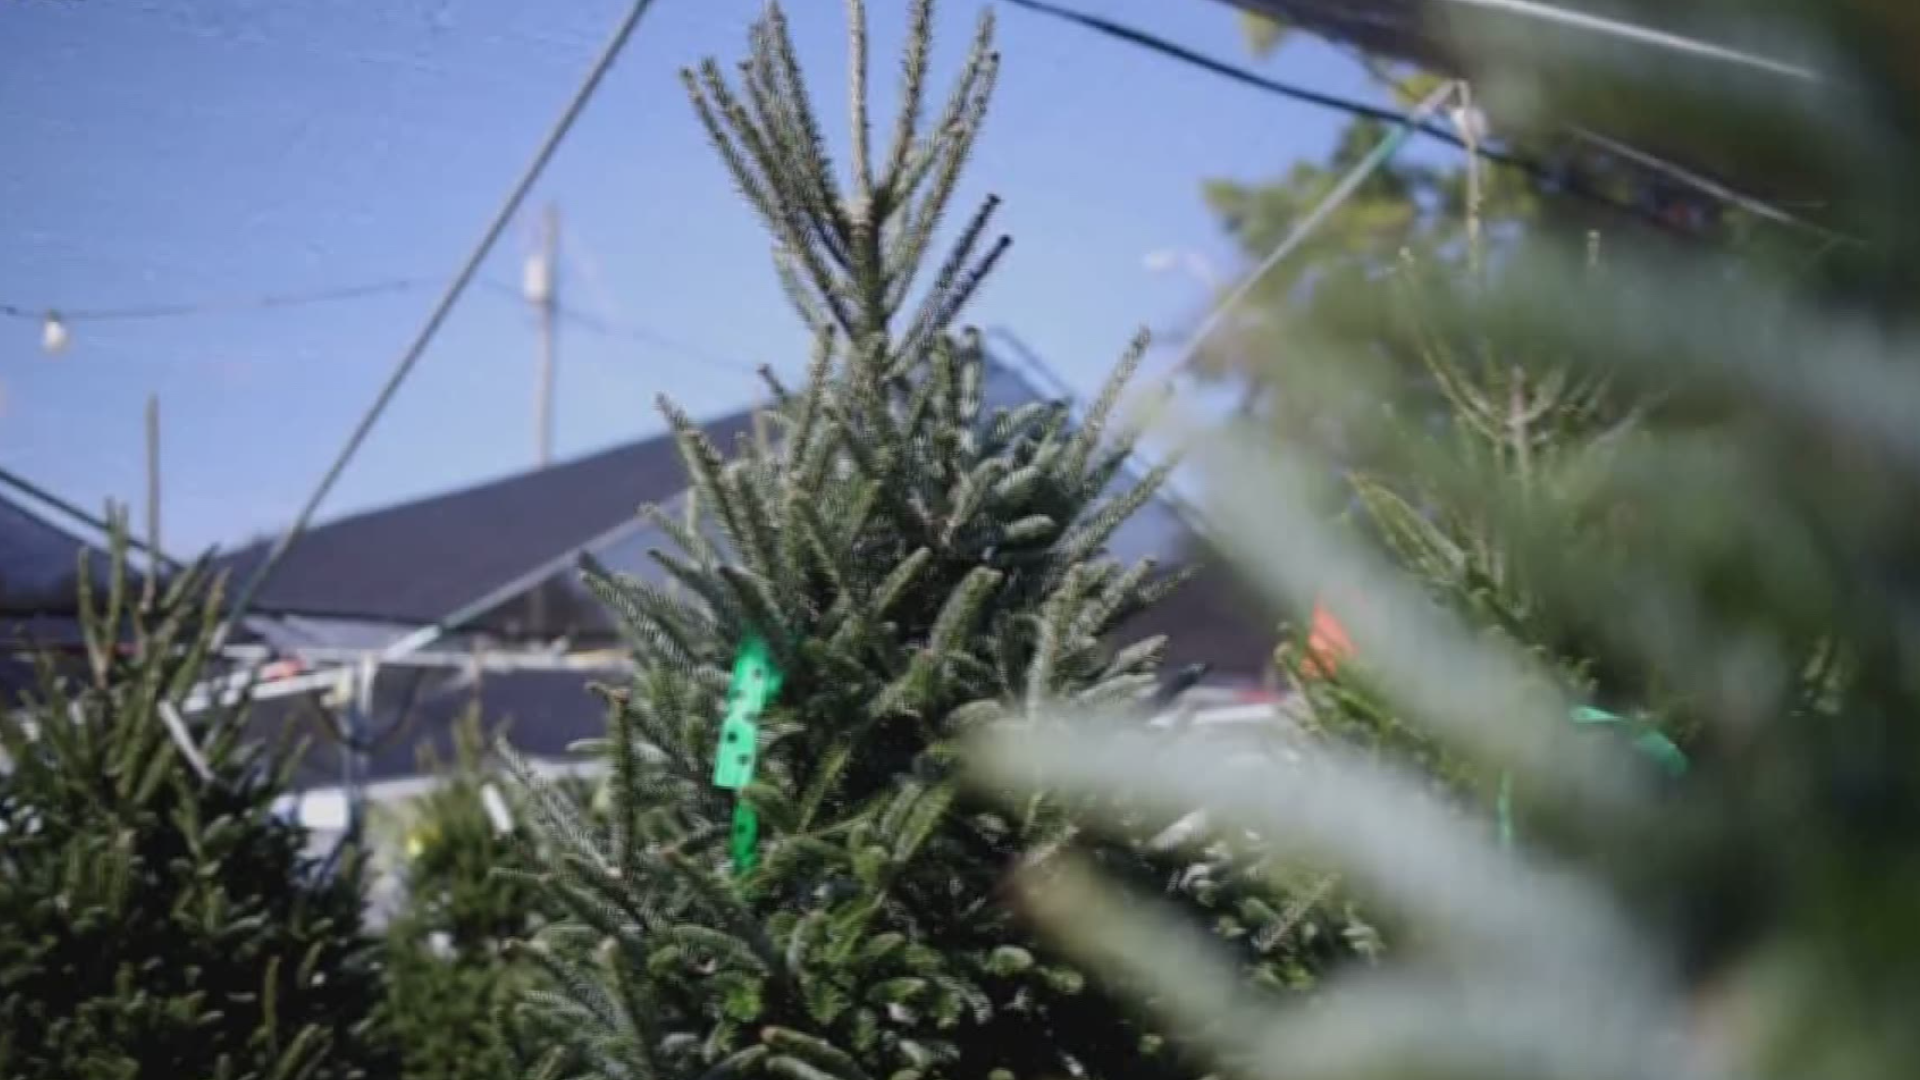 There are plenty of Christmas trees to go around, but fewer trees being grown and harvested means higher prices.